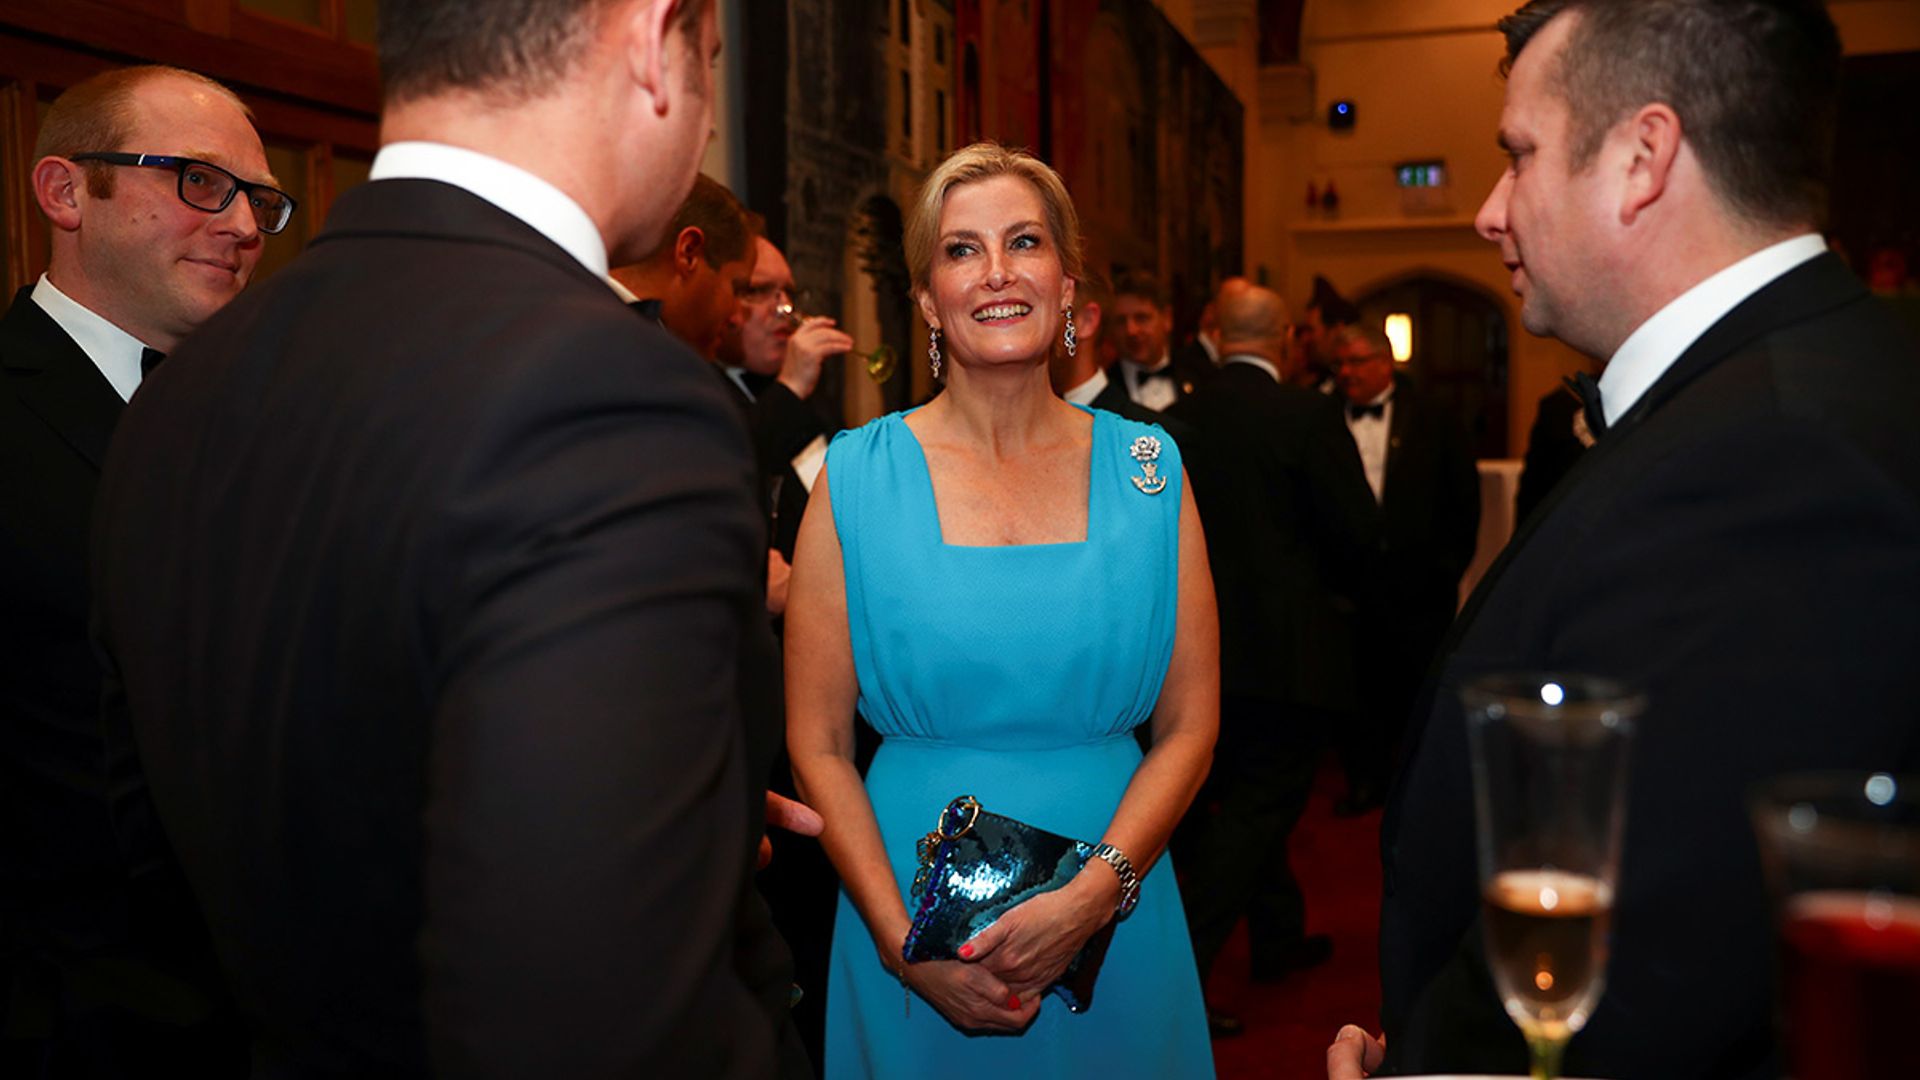 Sophie Wessex dazzles in gorgeous blue maxi gown at royal awards dinner